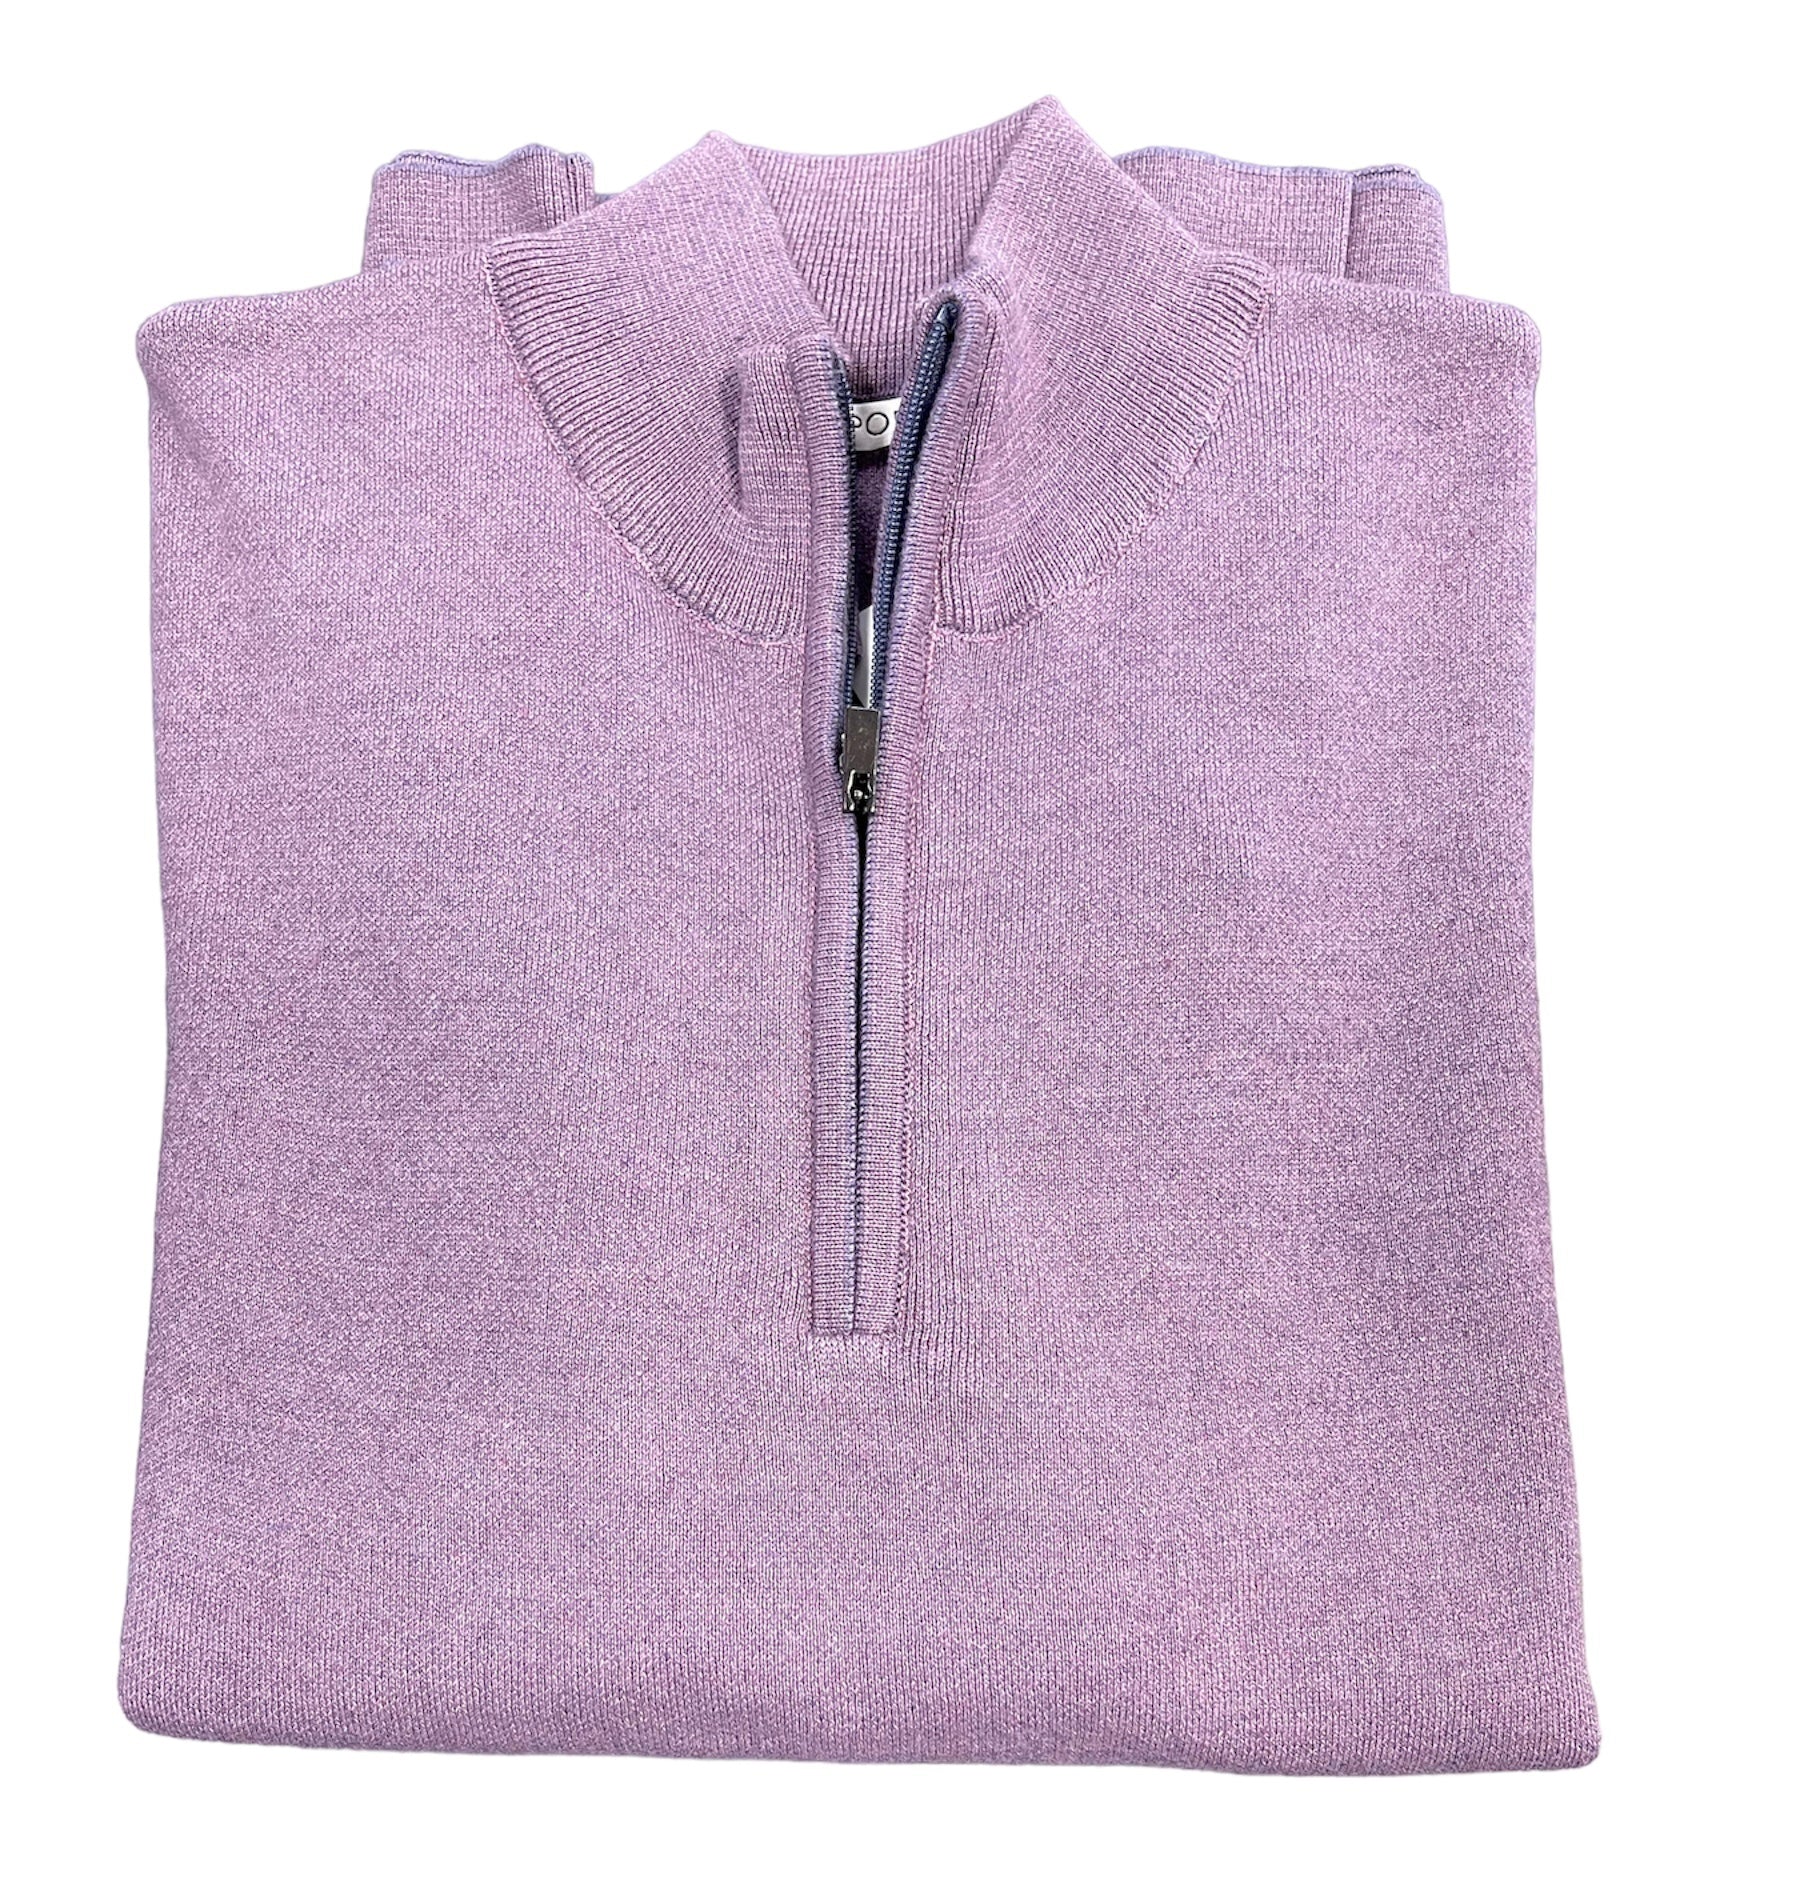 100% COTTON 1/ 4 ZIP SWEATER - LILAC